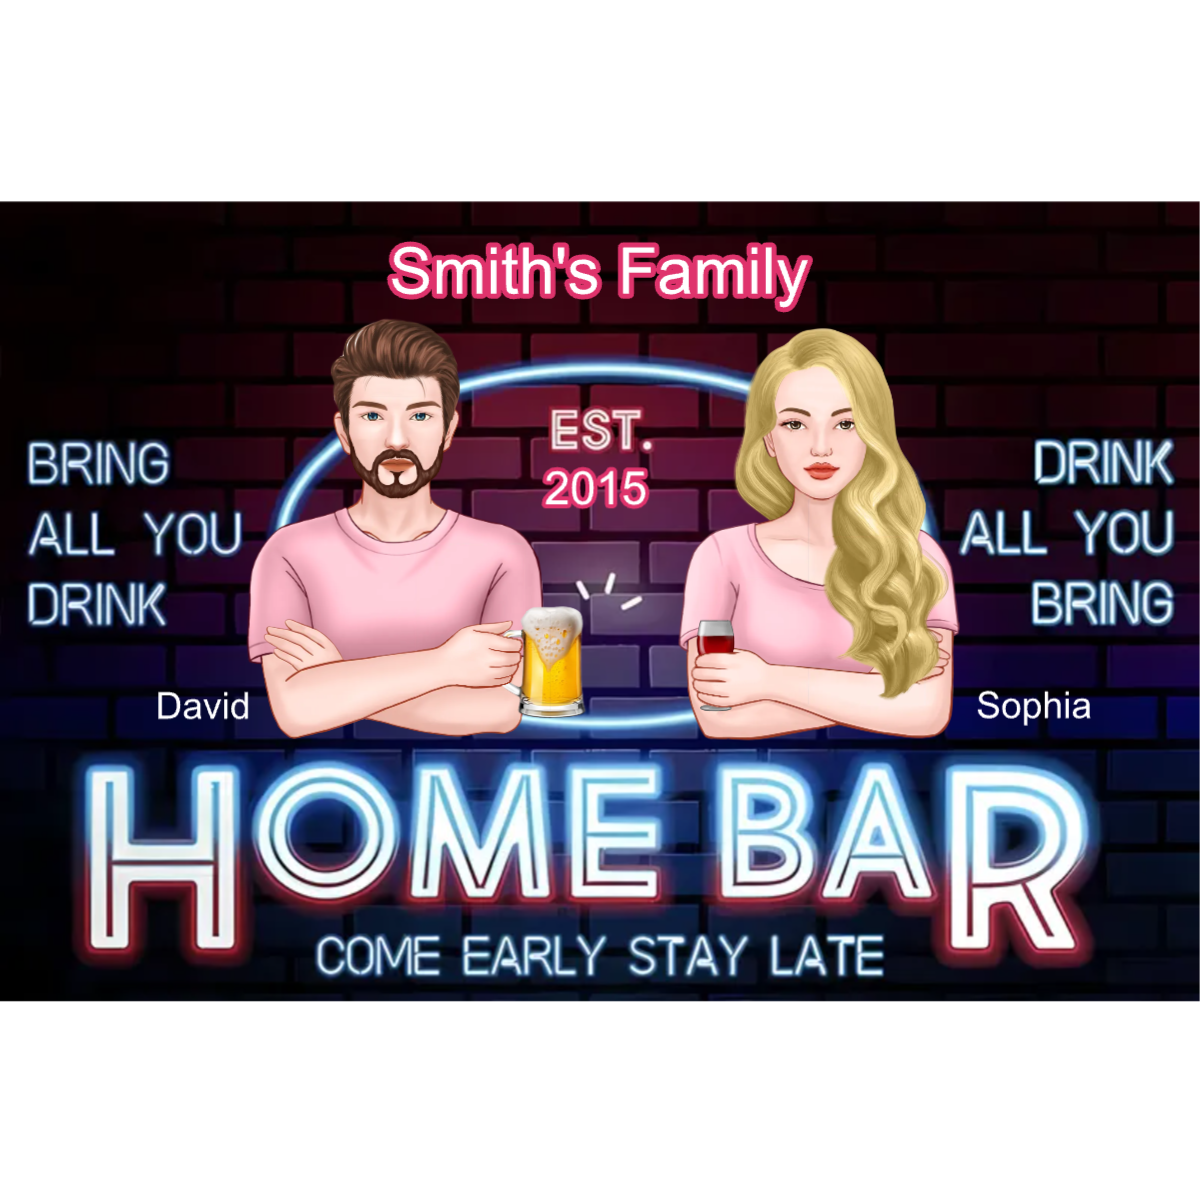 Home Bar II - Come Early & Stay Late: Bring All You Drink & Drink All You Bring - Couple Husband Wife Personalized Classic Metal Sign, White